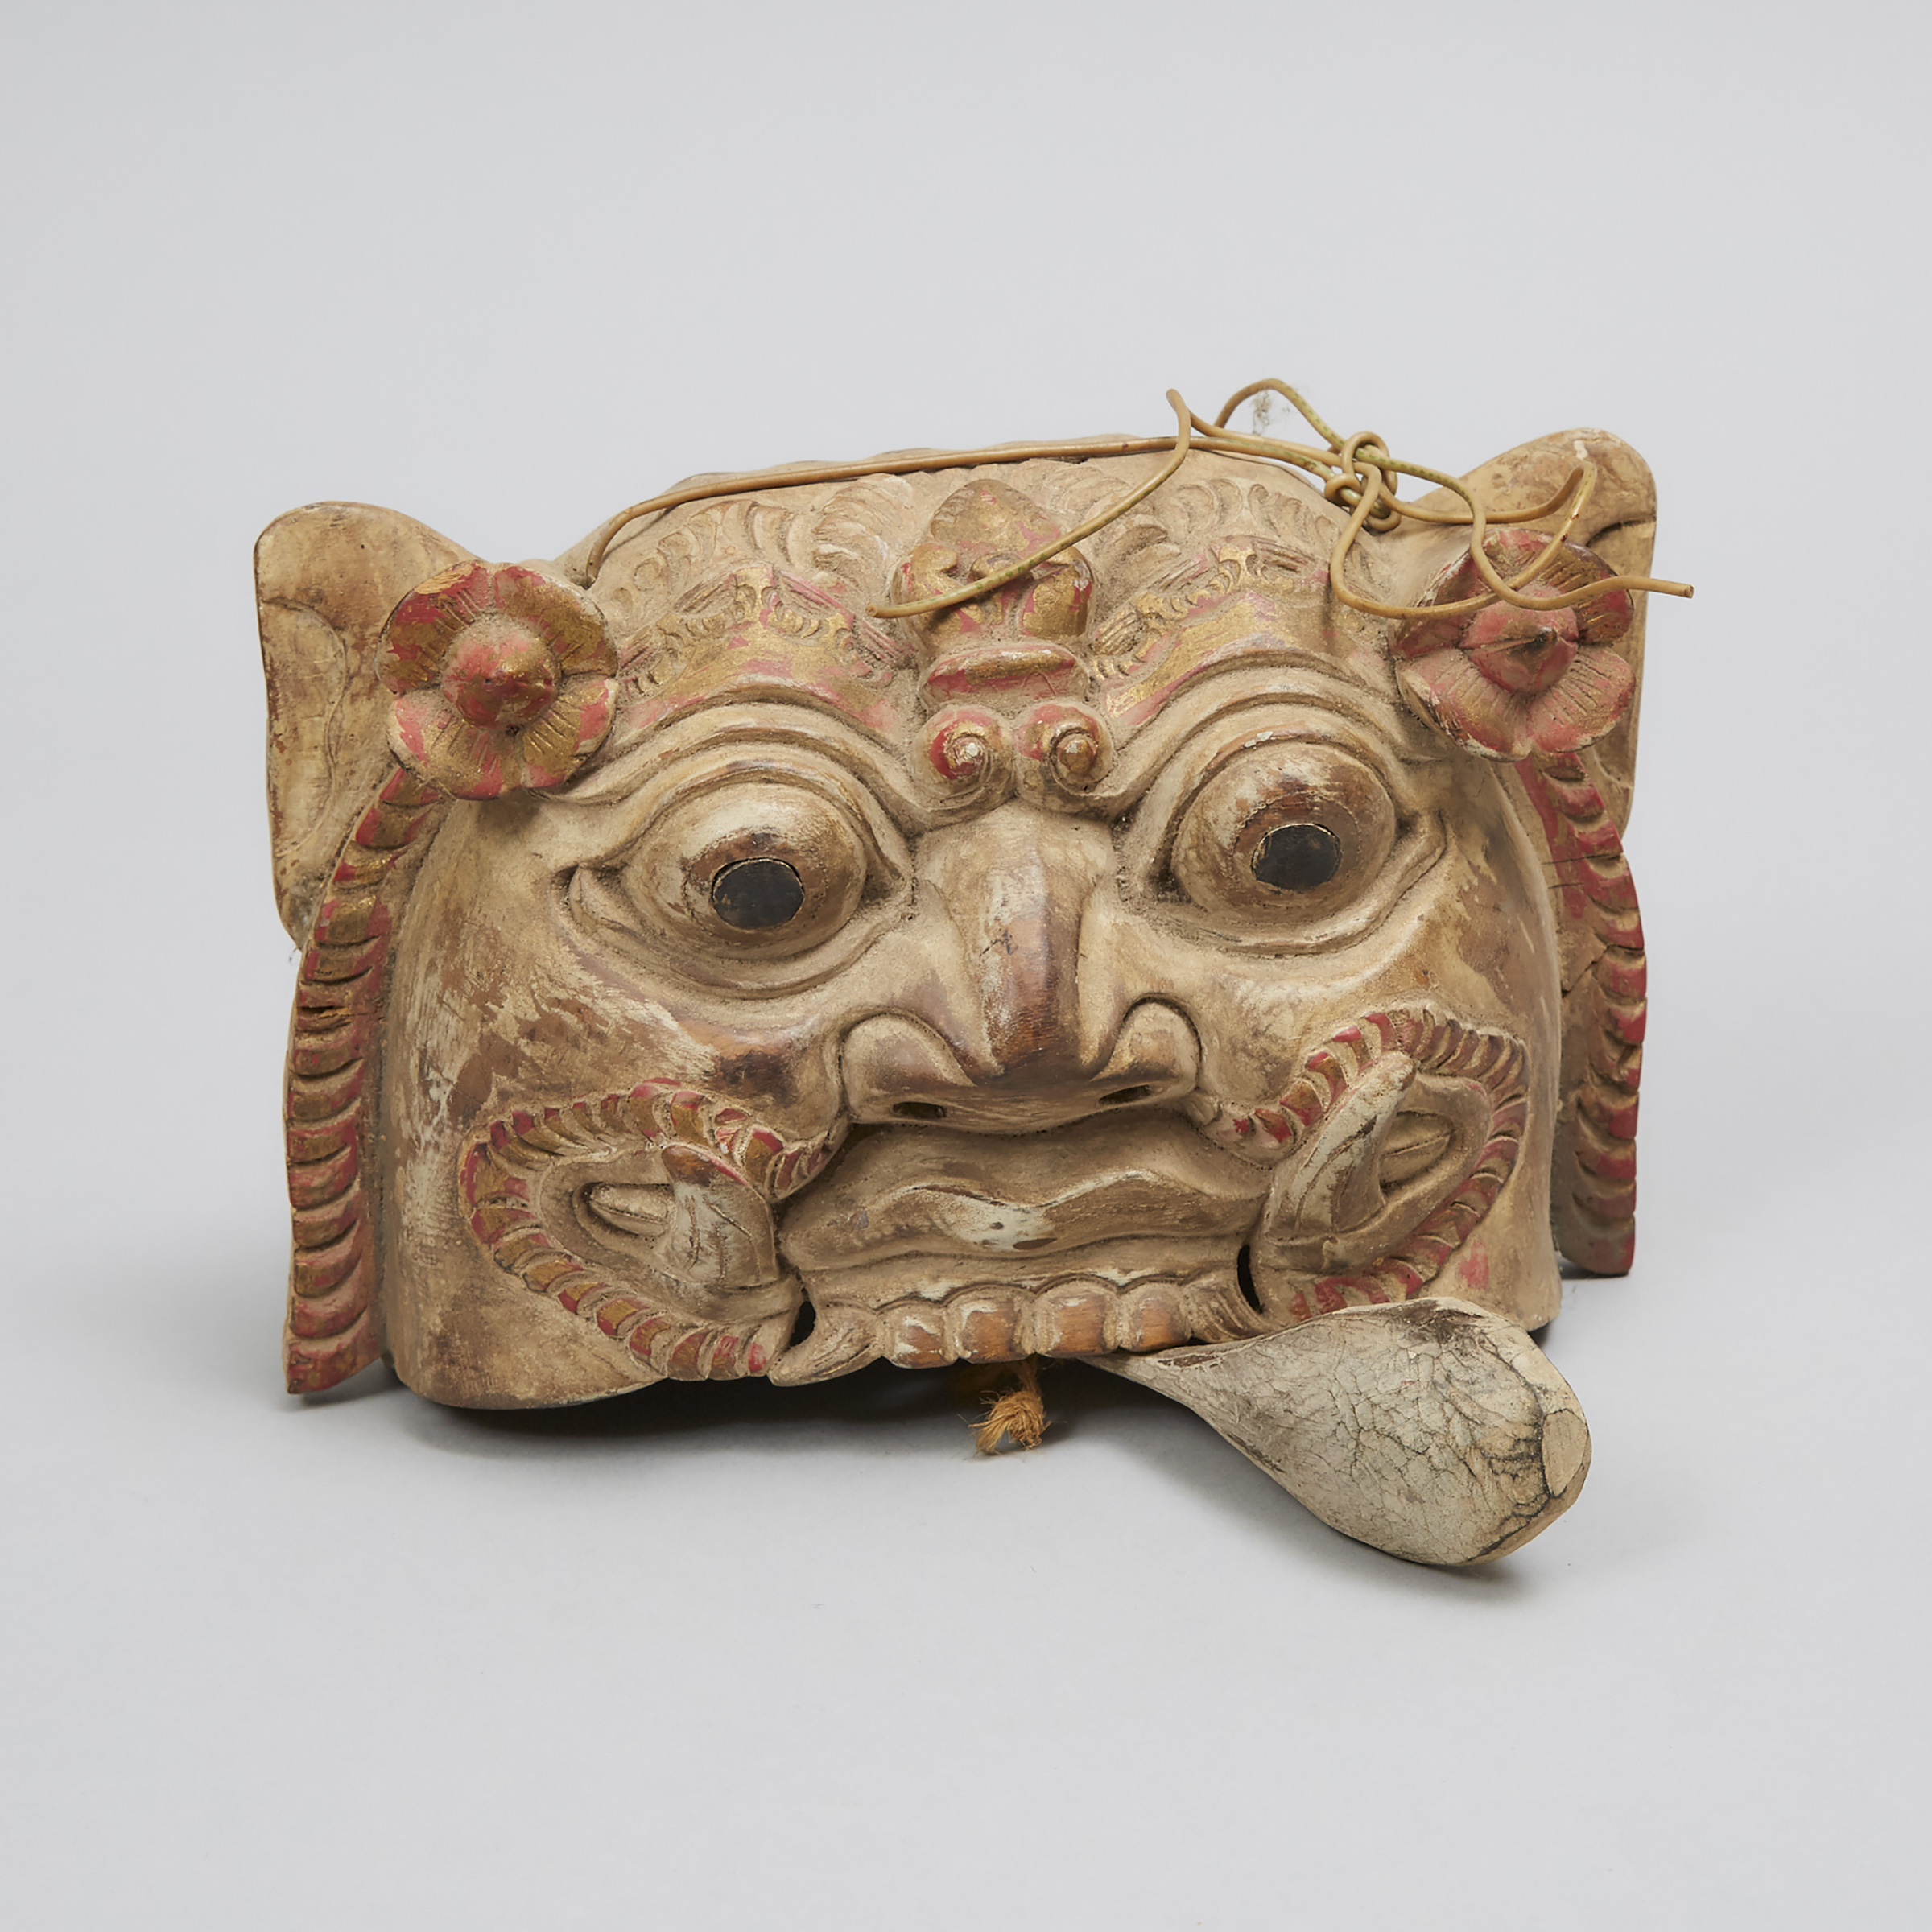 Balinese Carved Wood Mask of Barong Form Bell, 19th/early 20th century